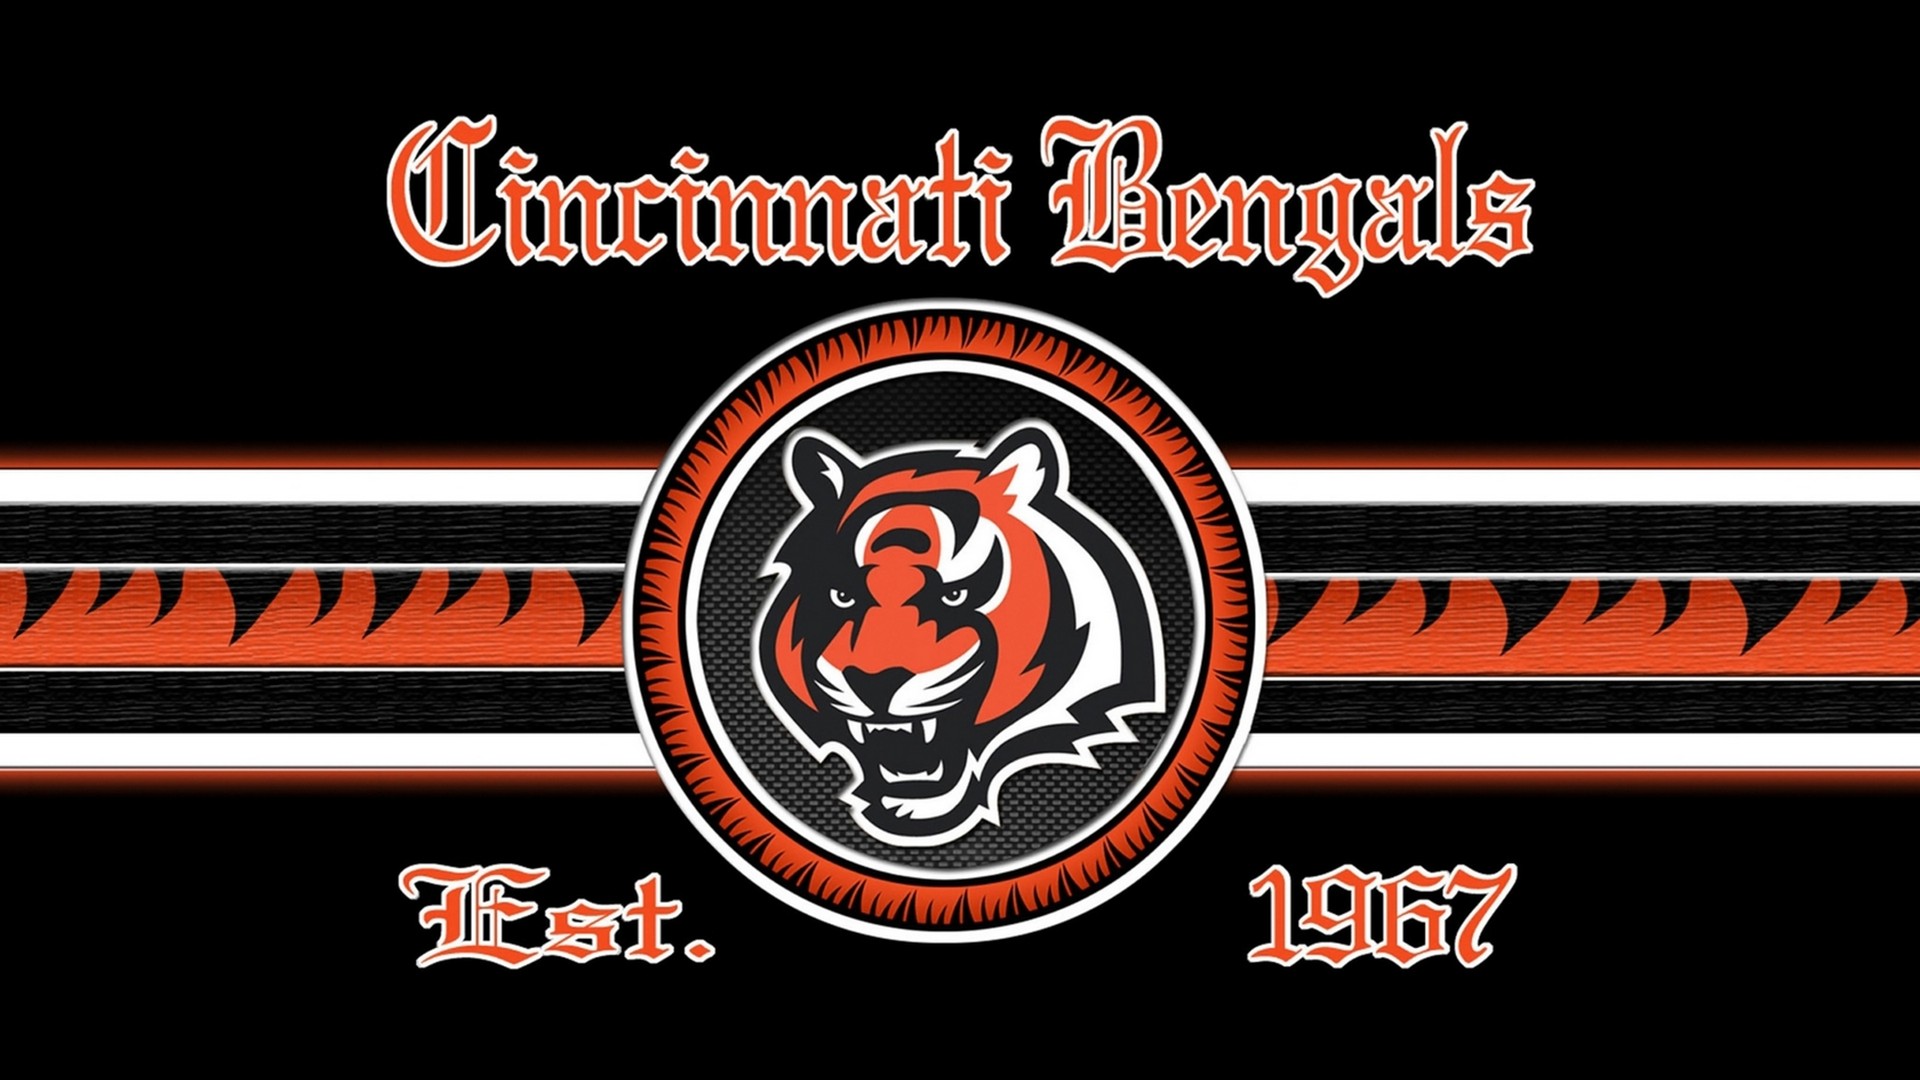 Cincinnati Bengals NFL HD Wallpapers with high-resolution 1920x1080 pixel. You can use this wallpaper for your Mac or Windows Desktop Background, iPhone, Android or Tablet and another Smartphone device